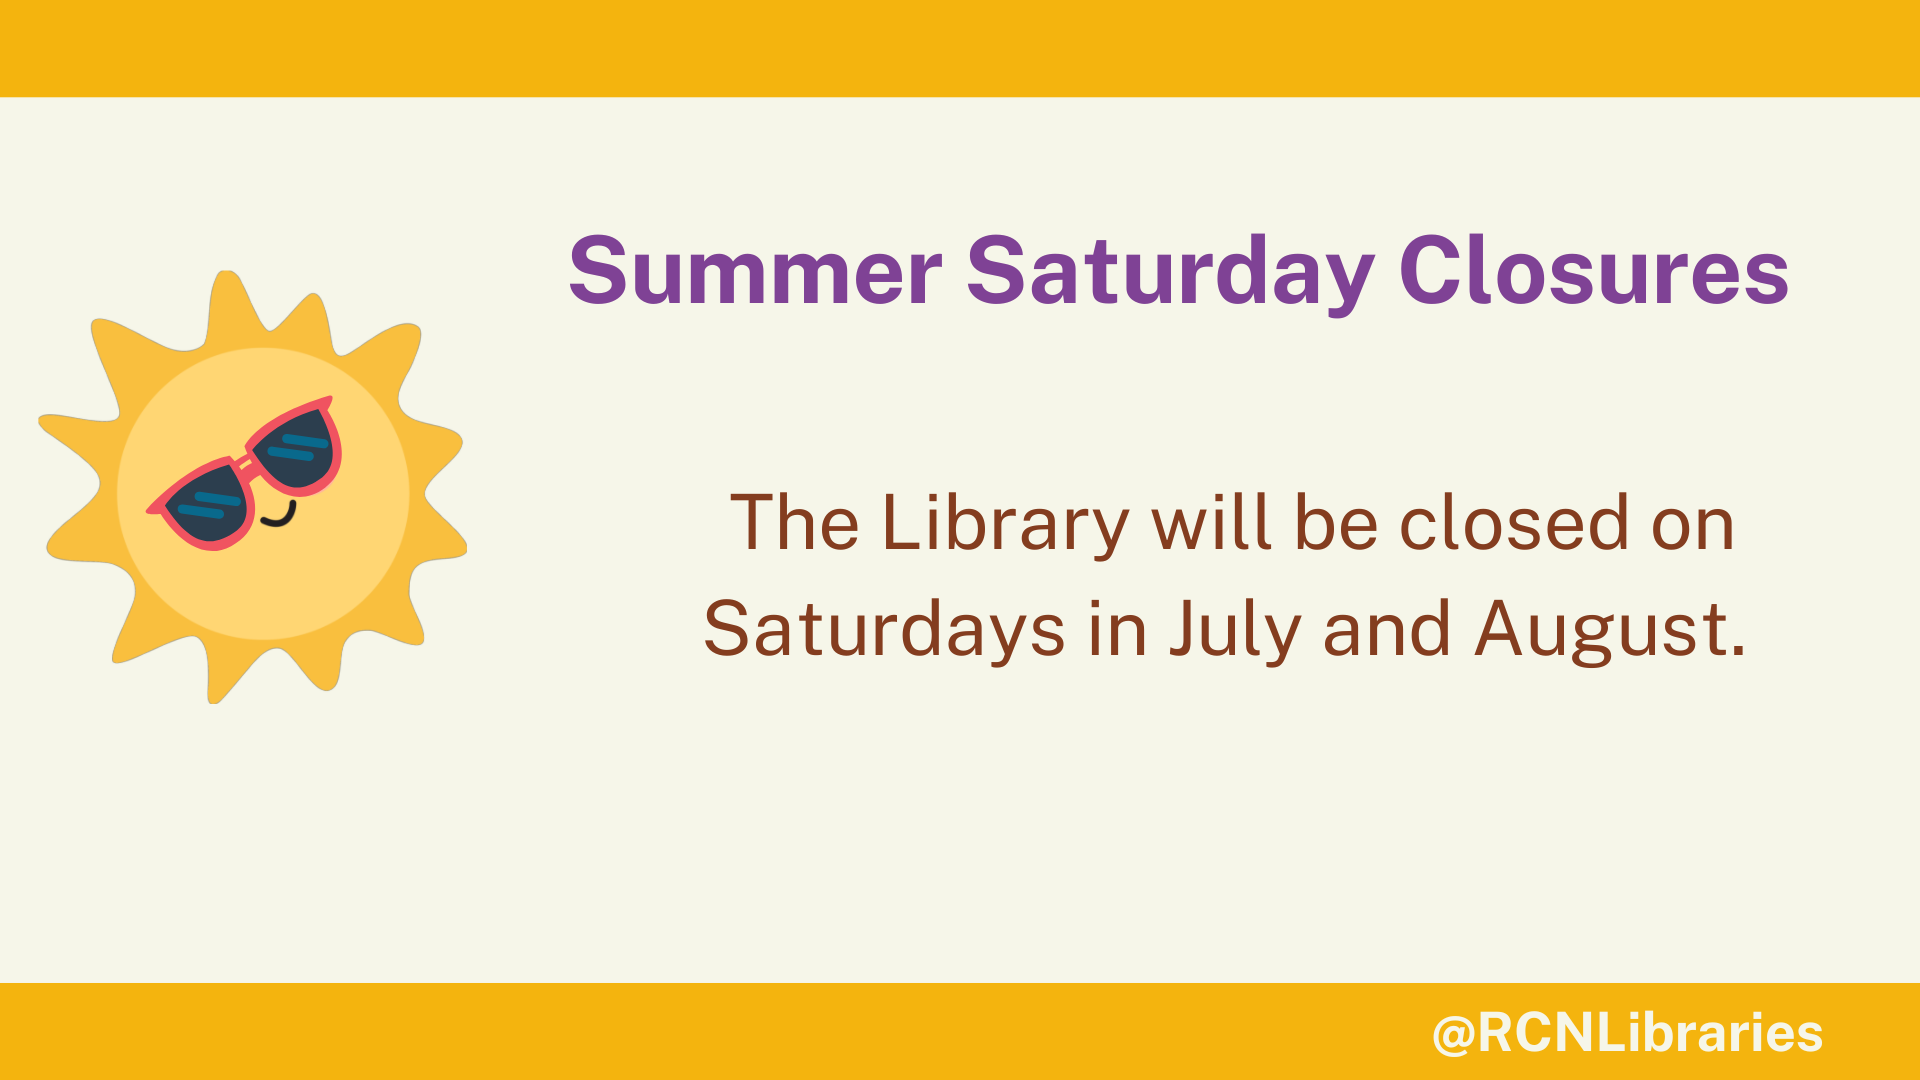 Image of a sun wearing sunglasses and text that reads Summer Saturday Closures: The Library will be closed on Saturdays in July and August.